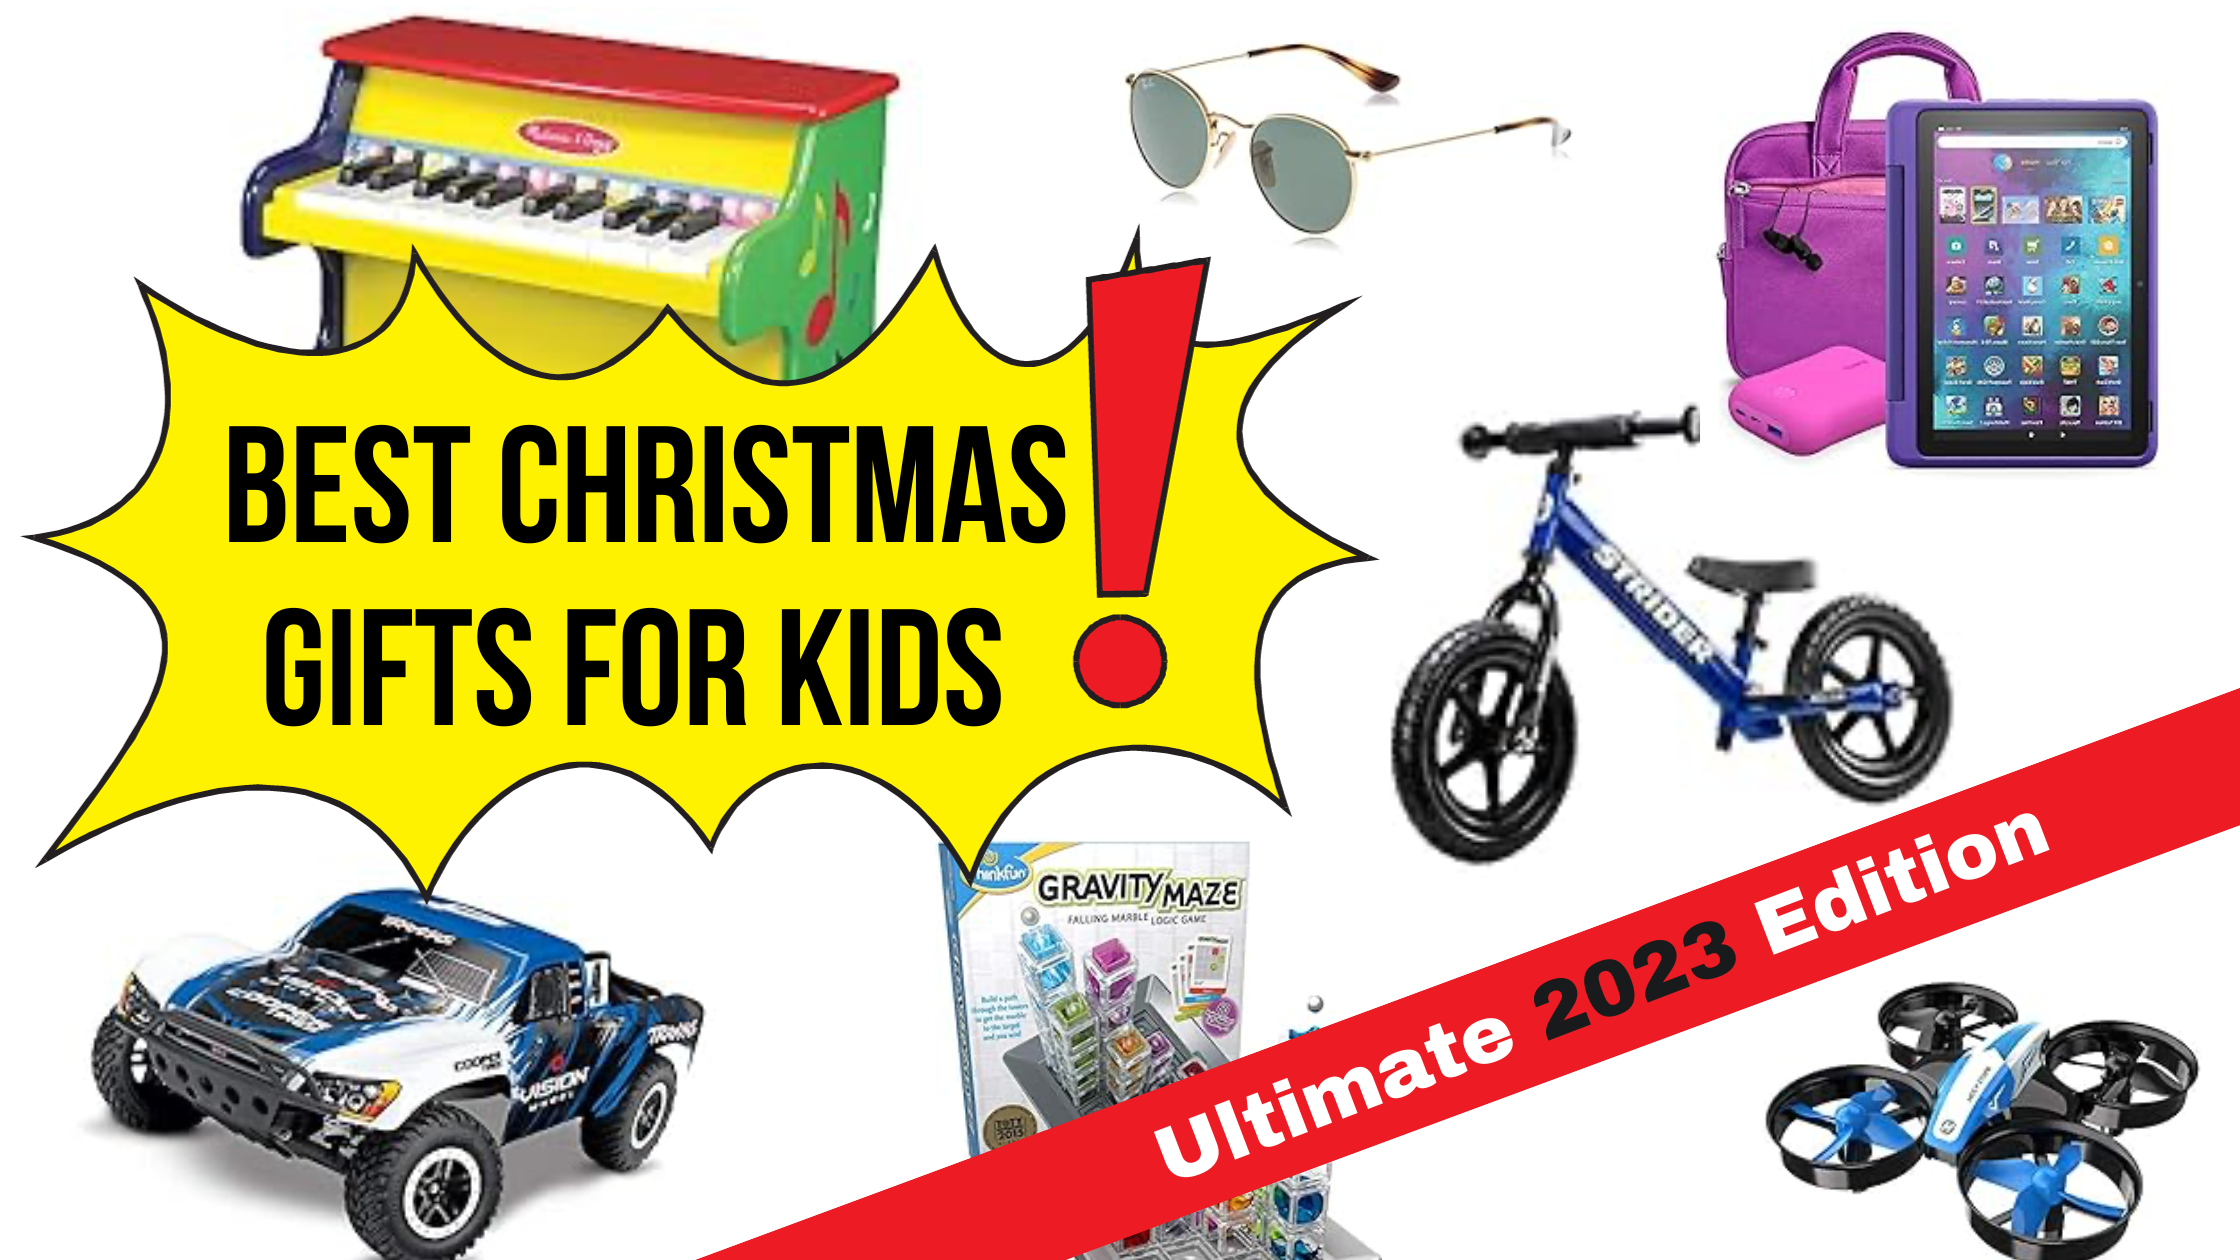 Best Christmas Kids gifts – Ultimate 2023 Edition